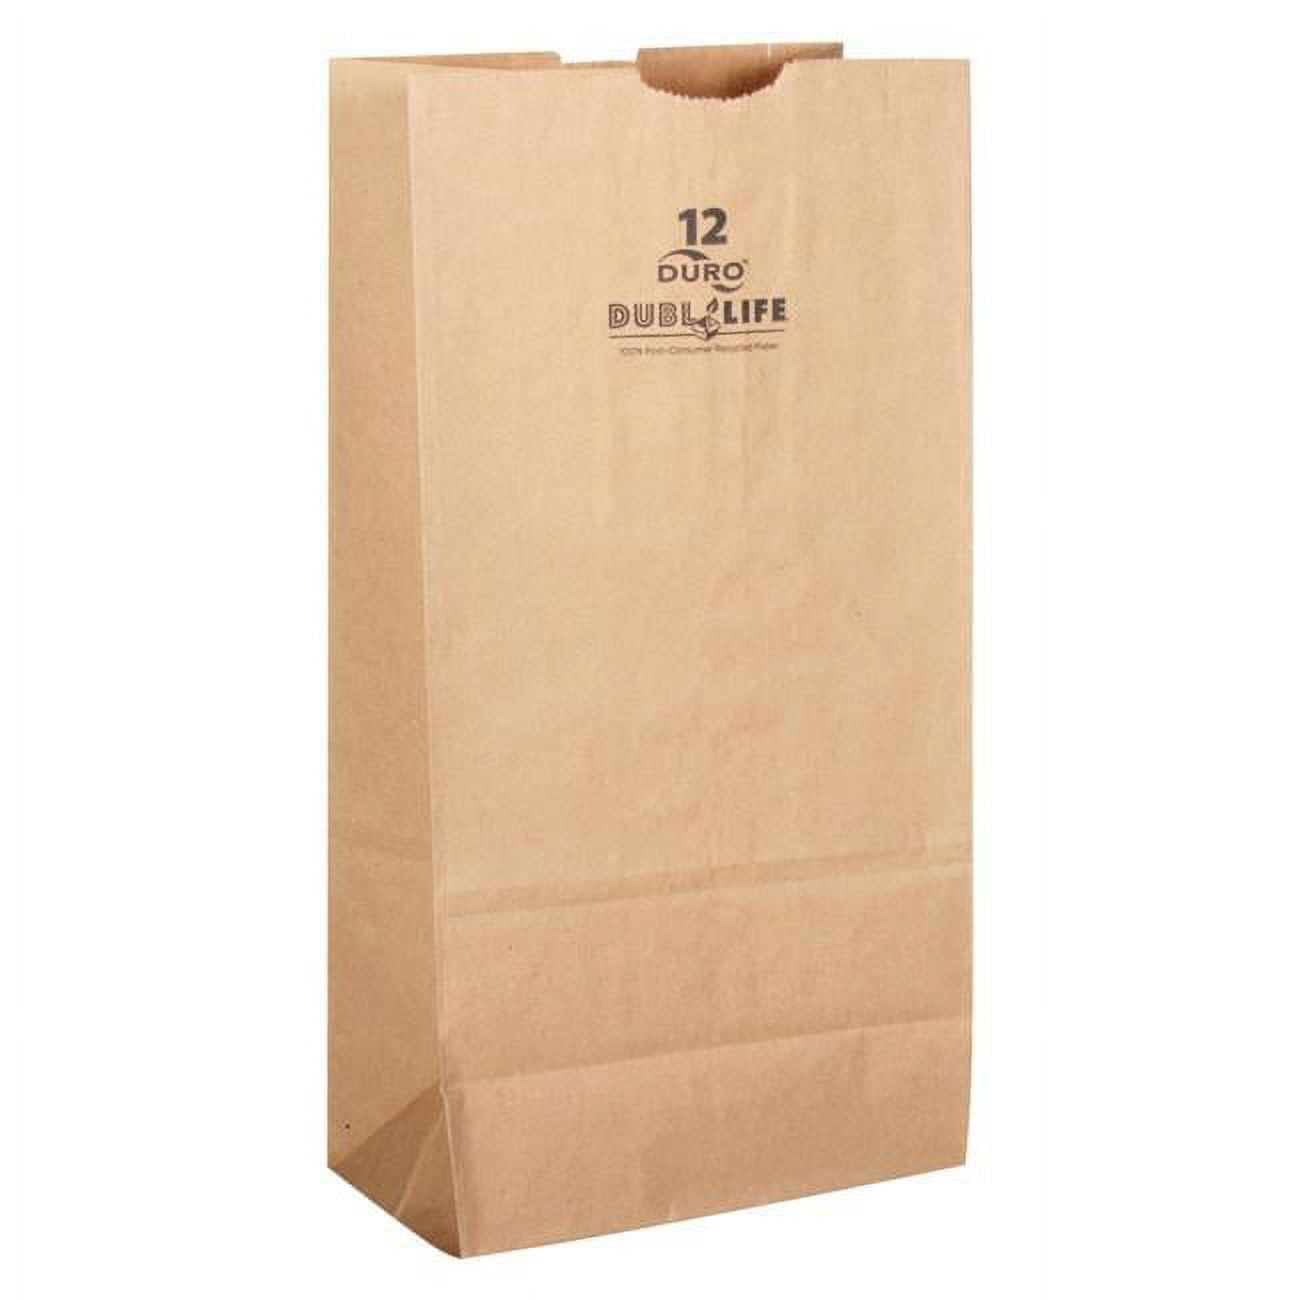 Picture of Dubl-Life 9074723 7.125 x 4.375 x 13.6875 in. Paper Shopping Bag - Pack of 500